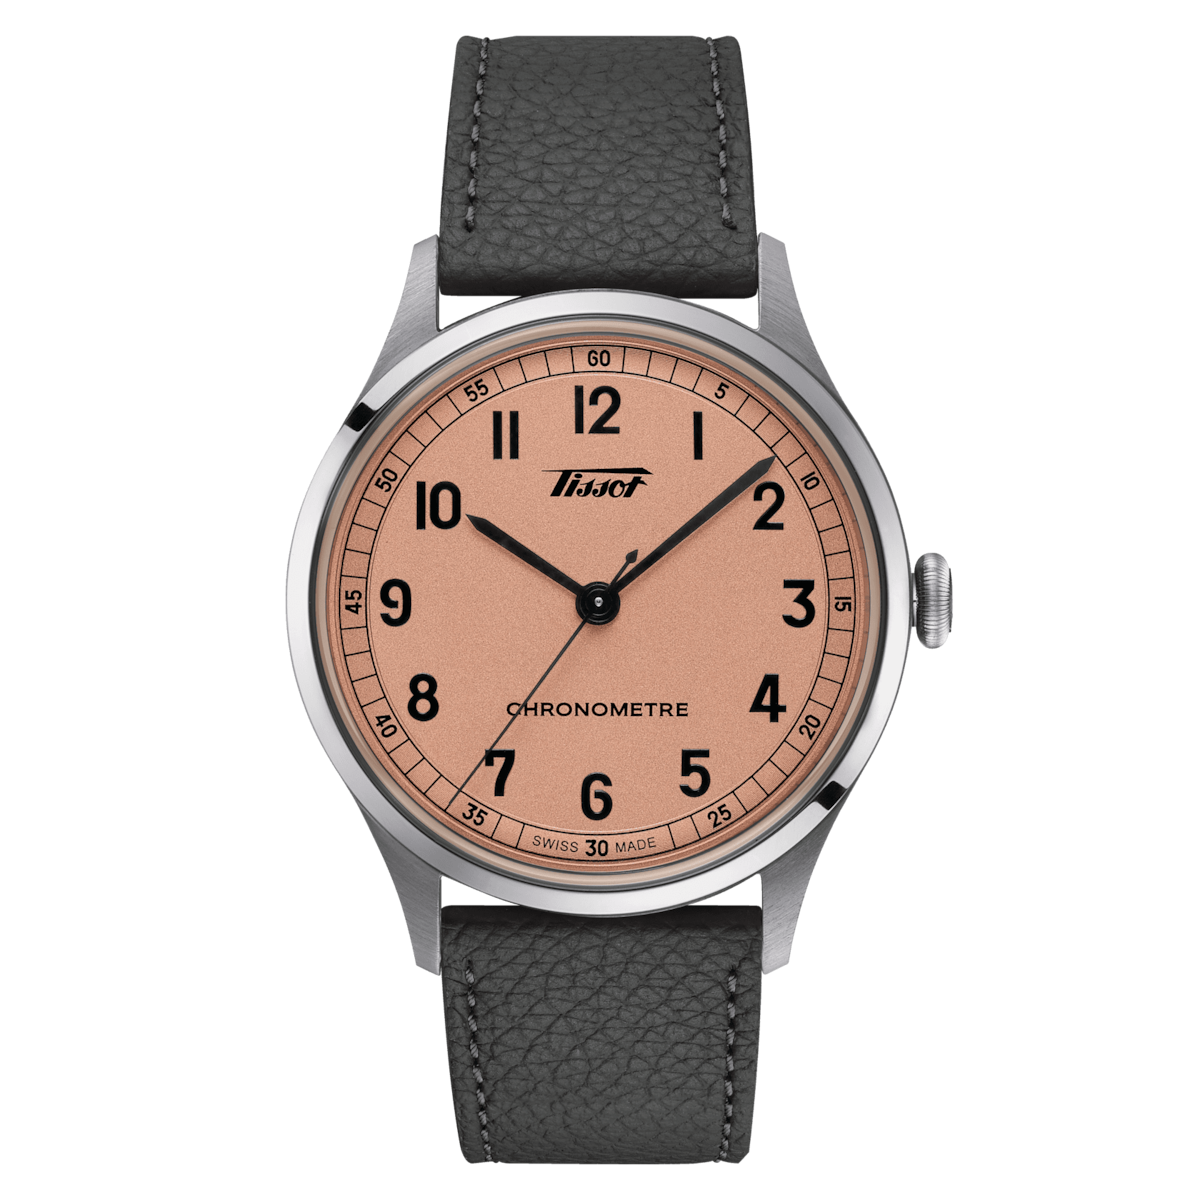 Heritage 1938 Automatic COSC